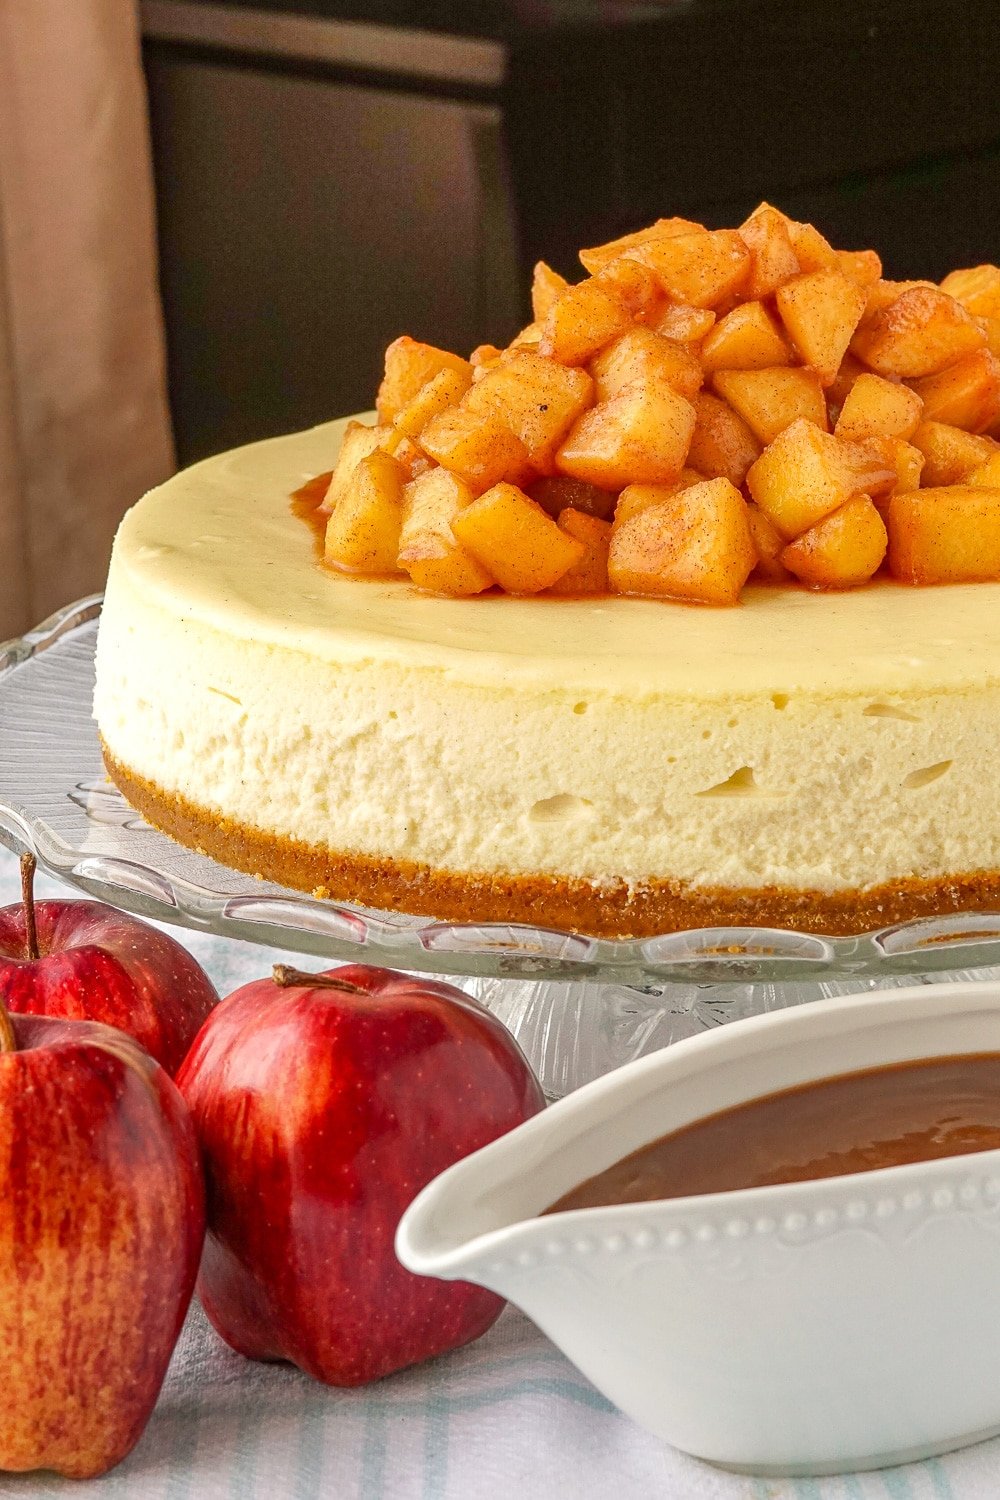 Caramel apple cheesecake shown with apples and caramel sauce